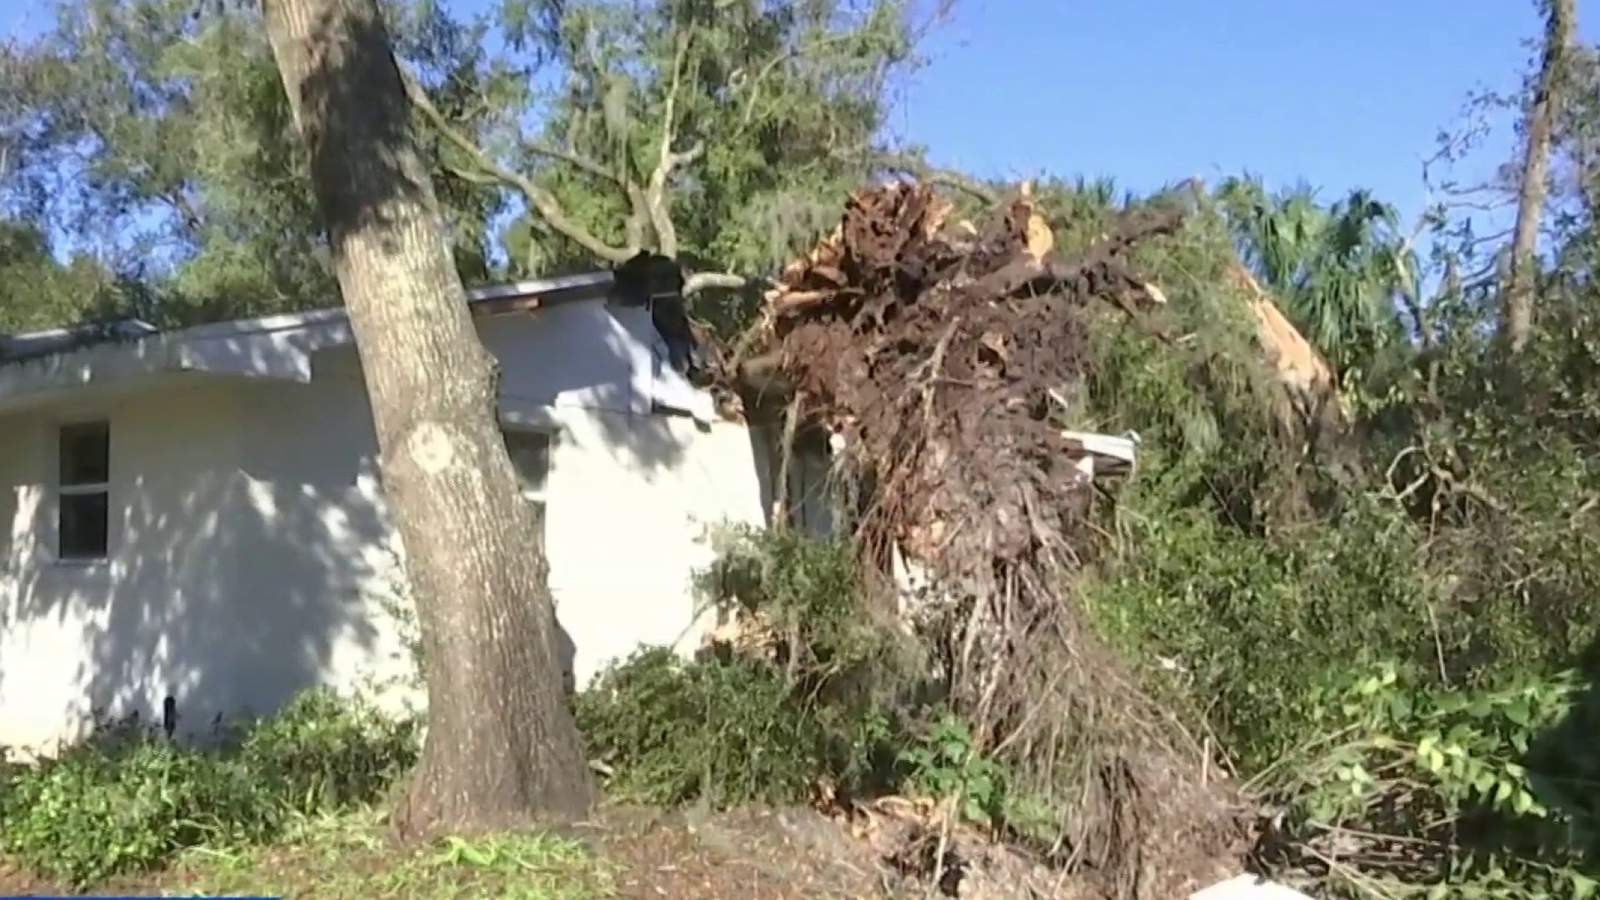 Cleanup efforts underway after Saturday’s severe storms in Central Florida